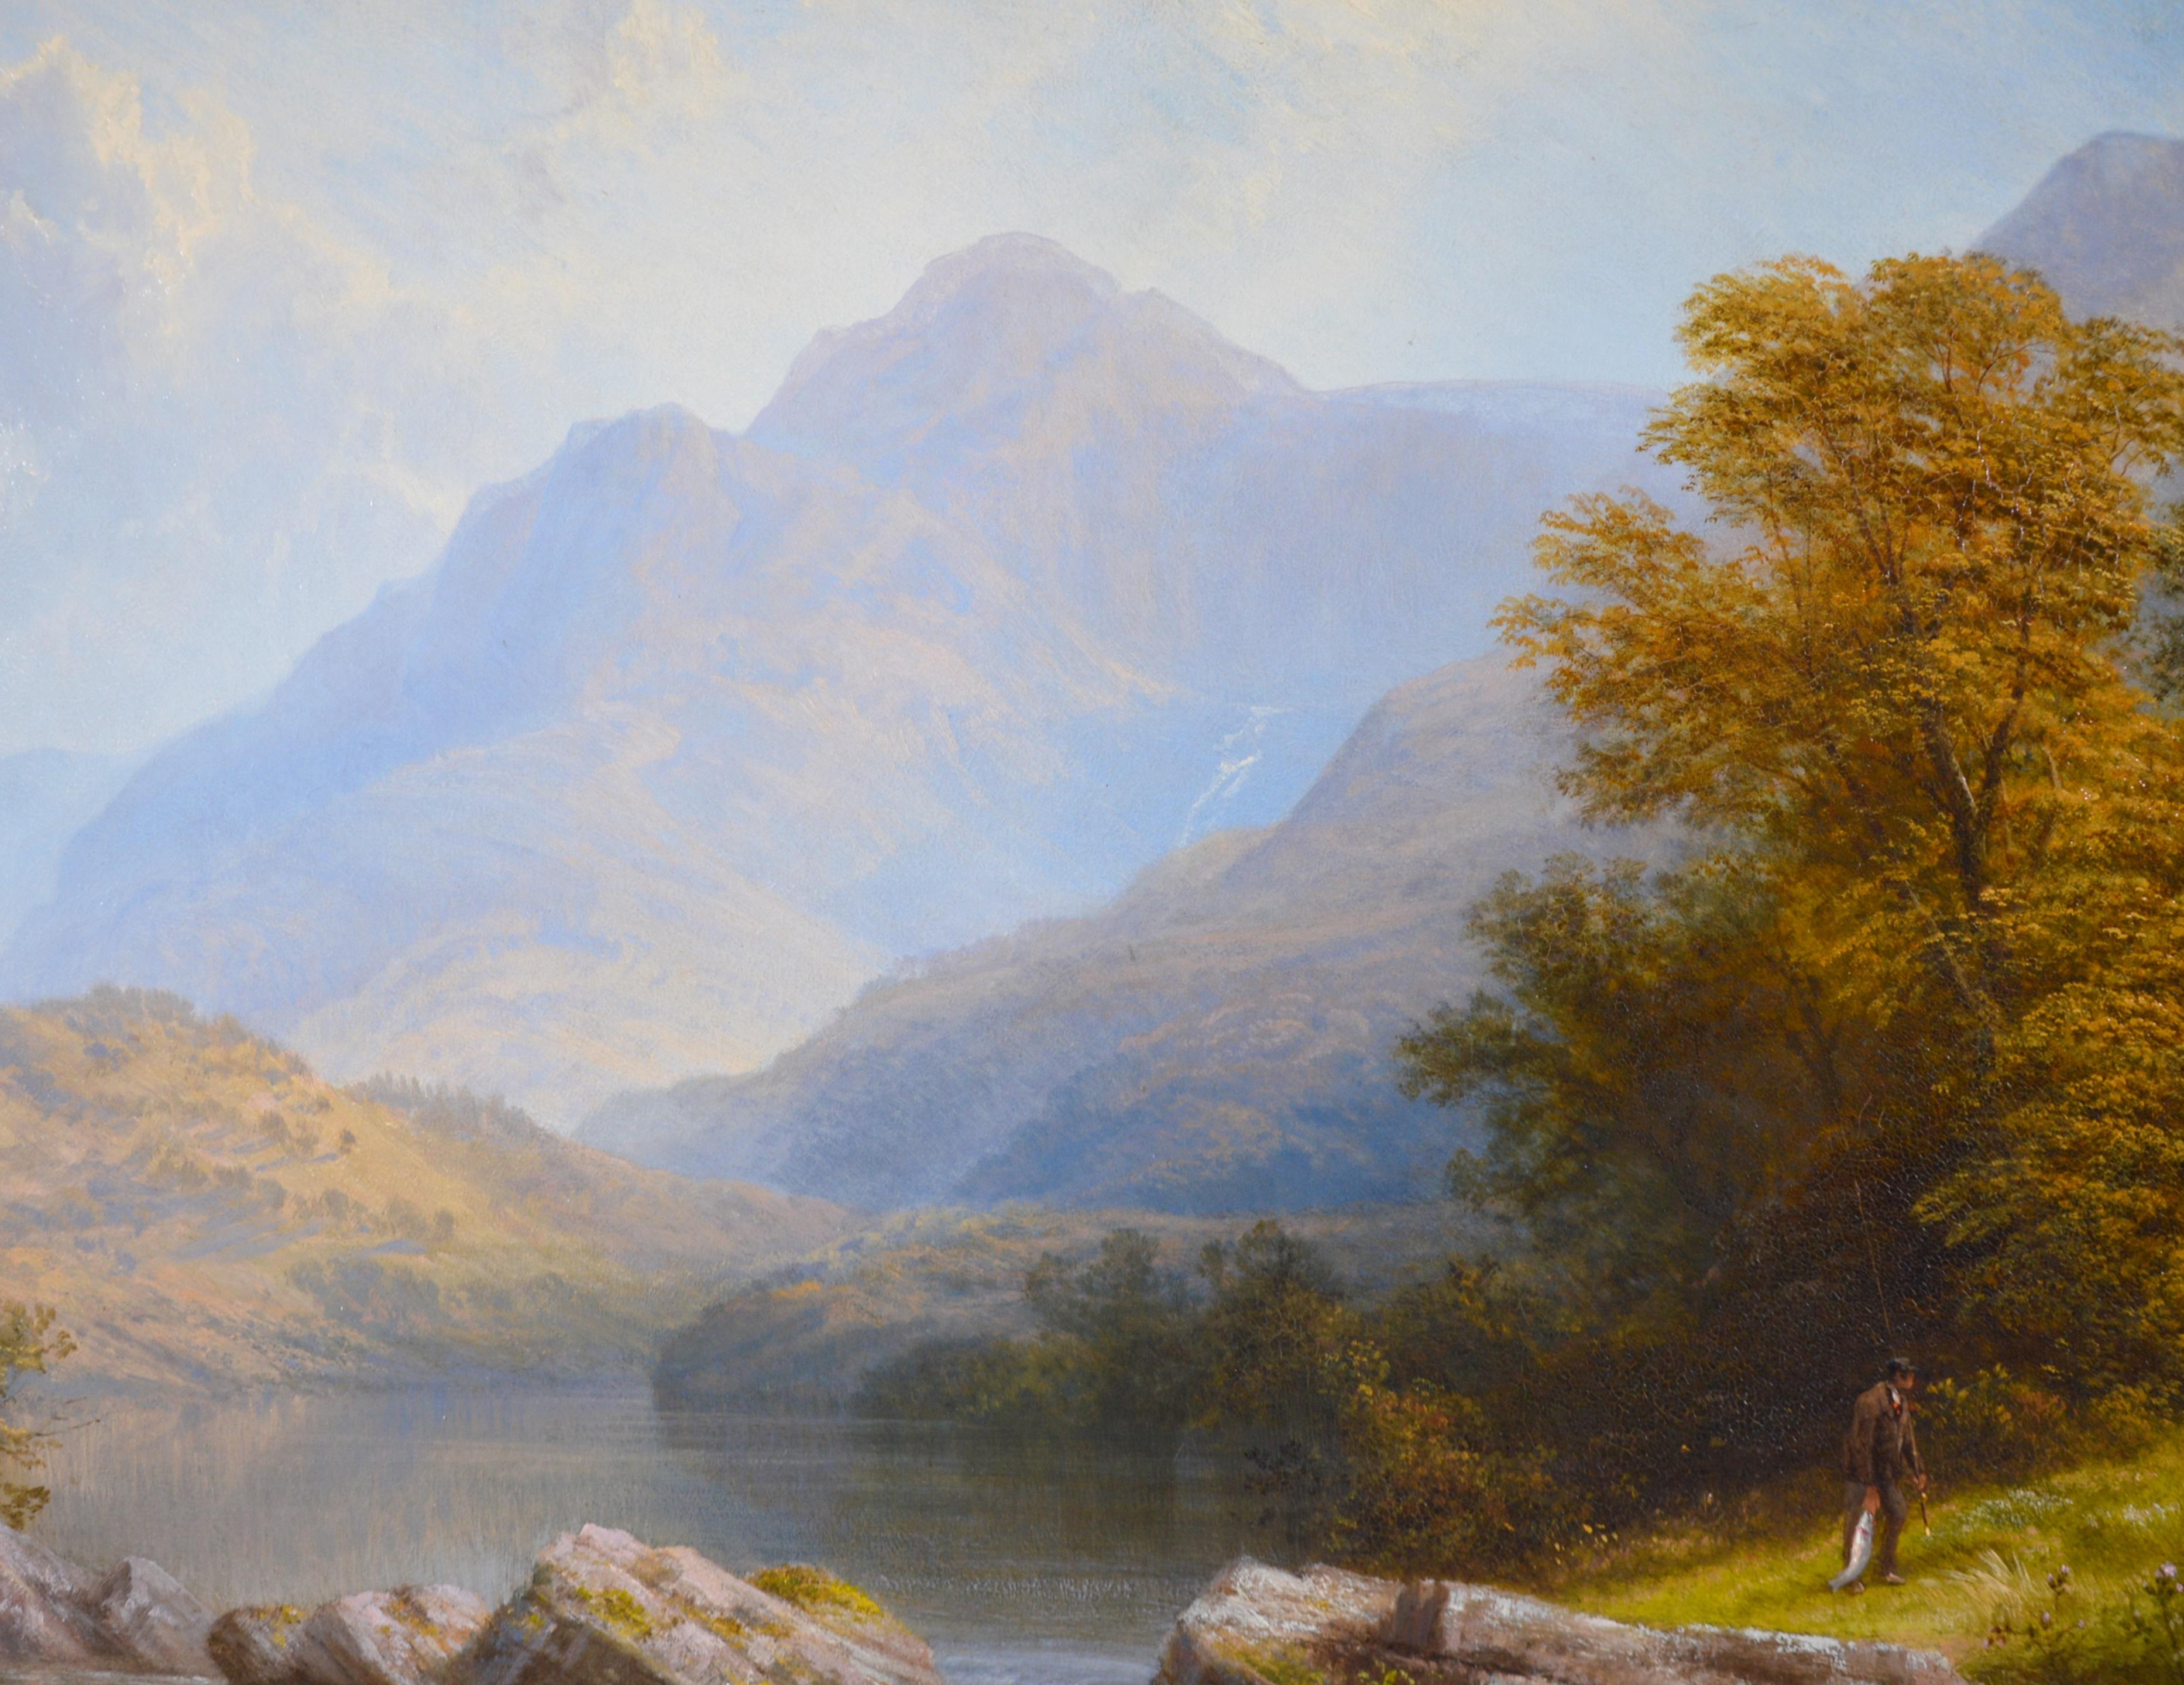 ‘Langdale, Westmorland’ by George Cole (1810-1883). This very large fine oil on canvas of a waterfall in the Lake District of England is signed and dated by the artist and was exhibited at the Royal Society of British Artists in 1879.  

Academy